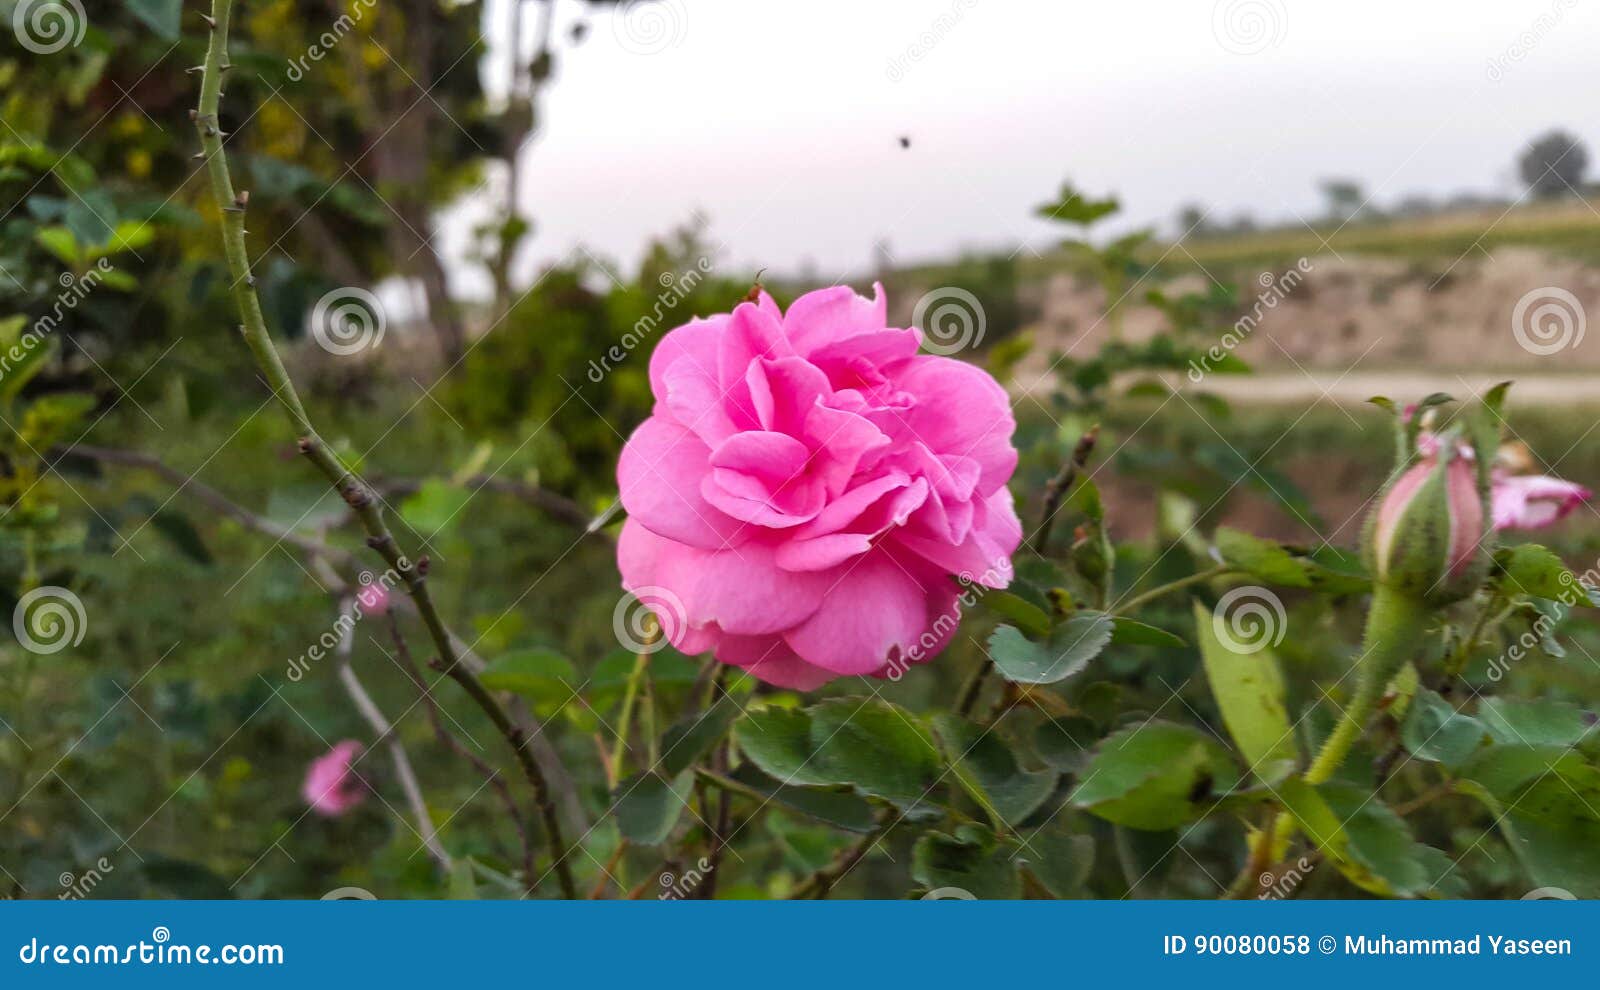 Pink Rose In The Fields Hd Stock Photo Image Of Nature 90080058